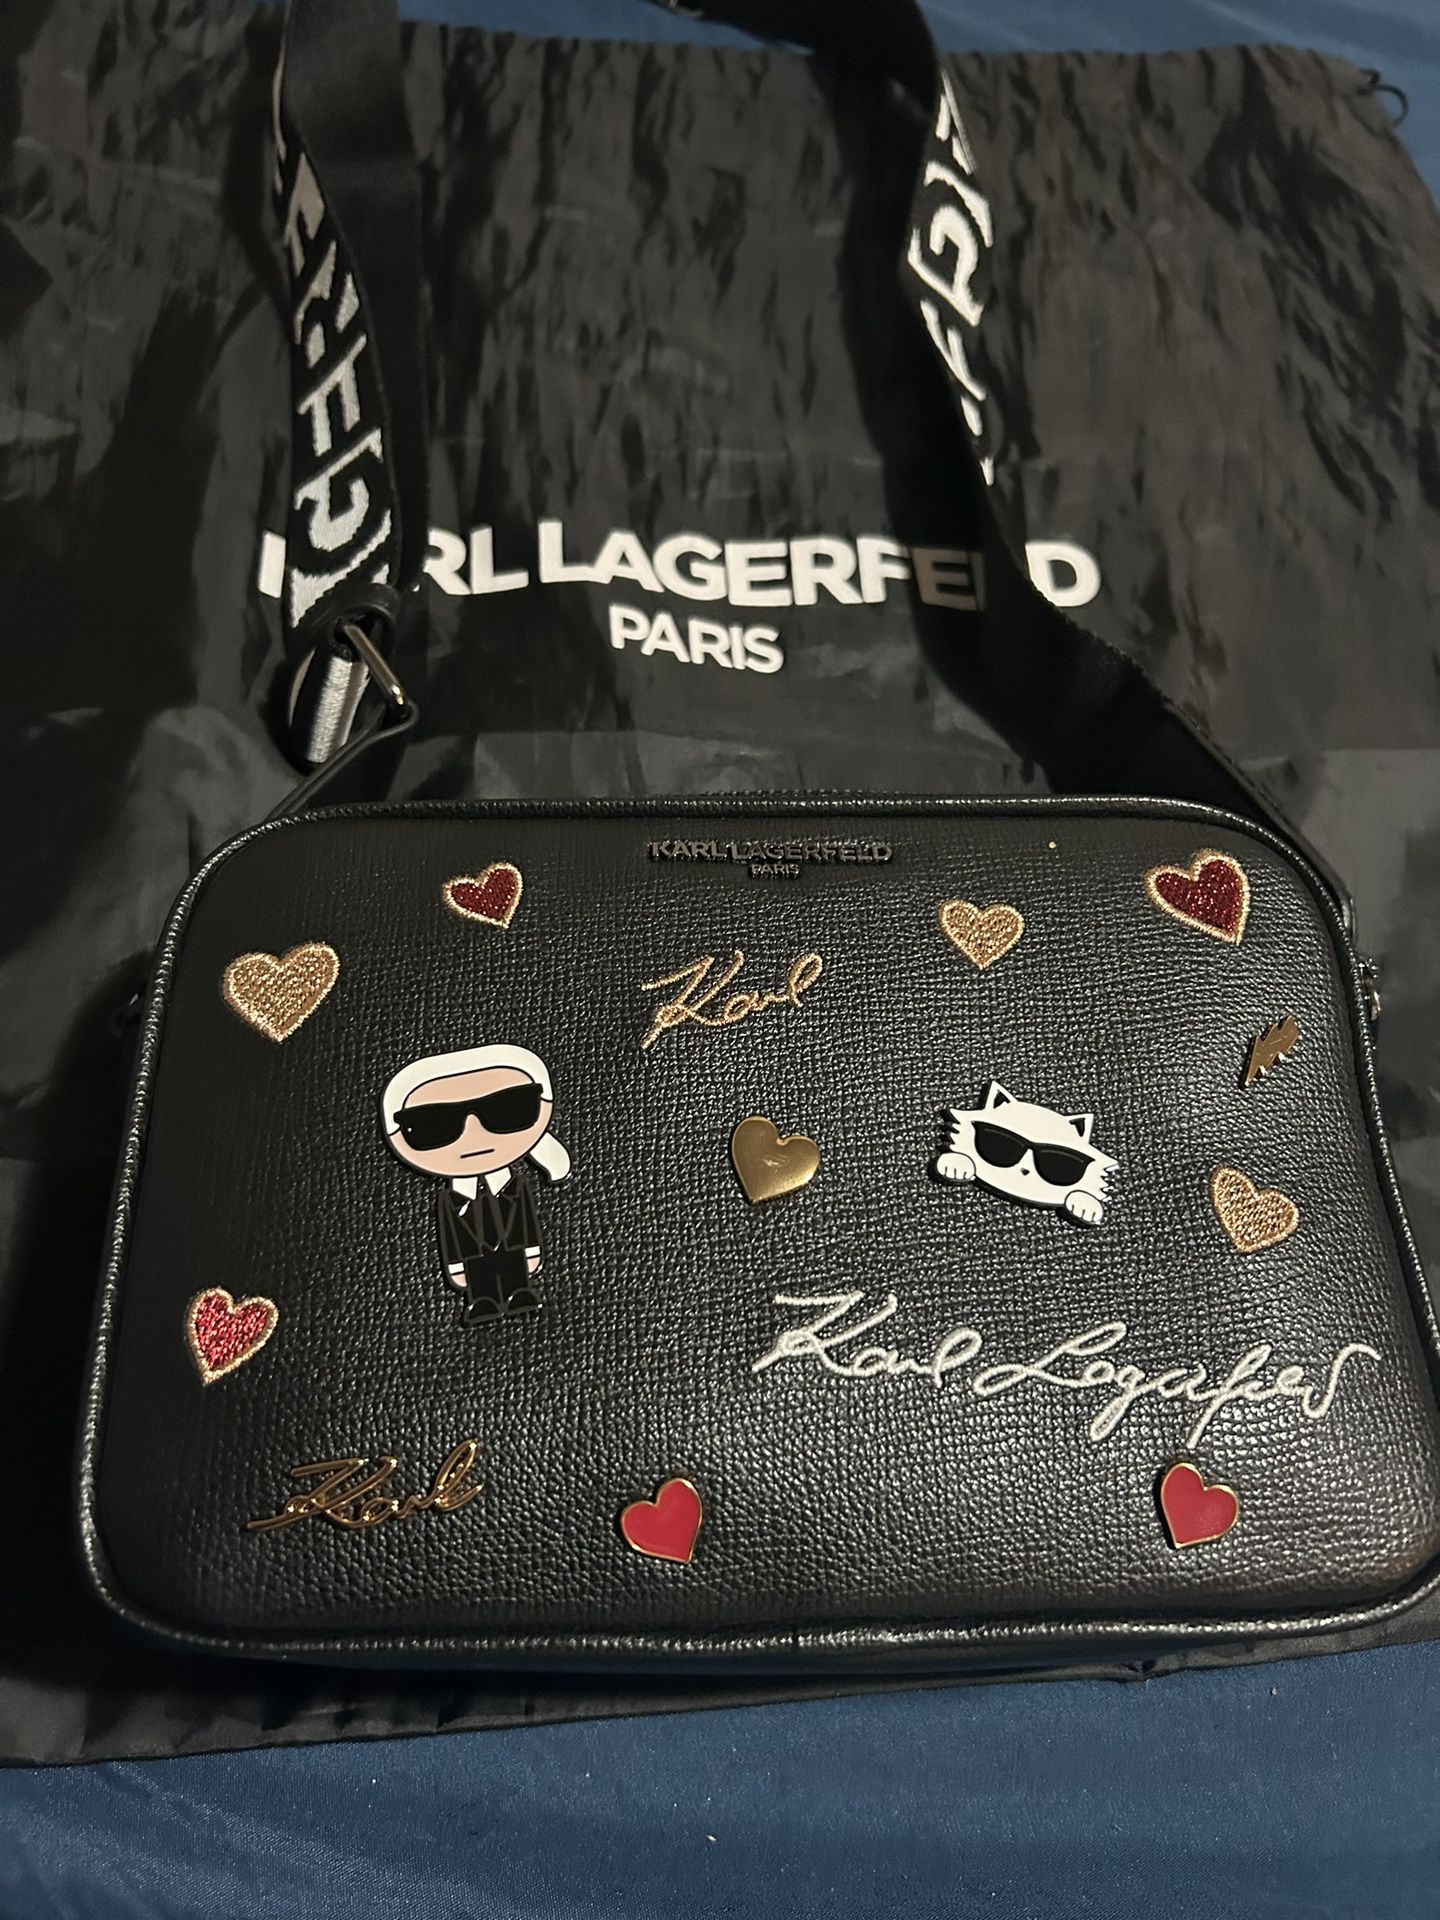 Karl Lagerfeld cham crossbody bag - New With Tags:)